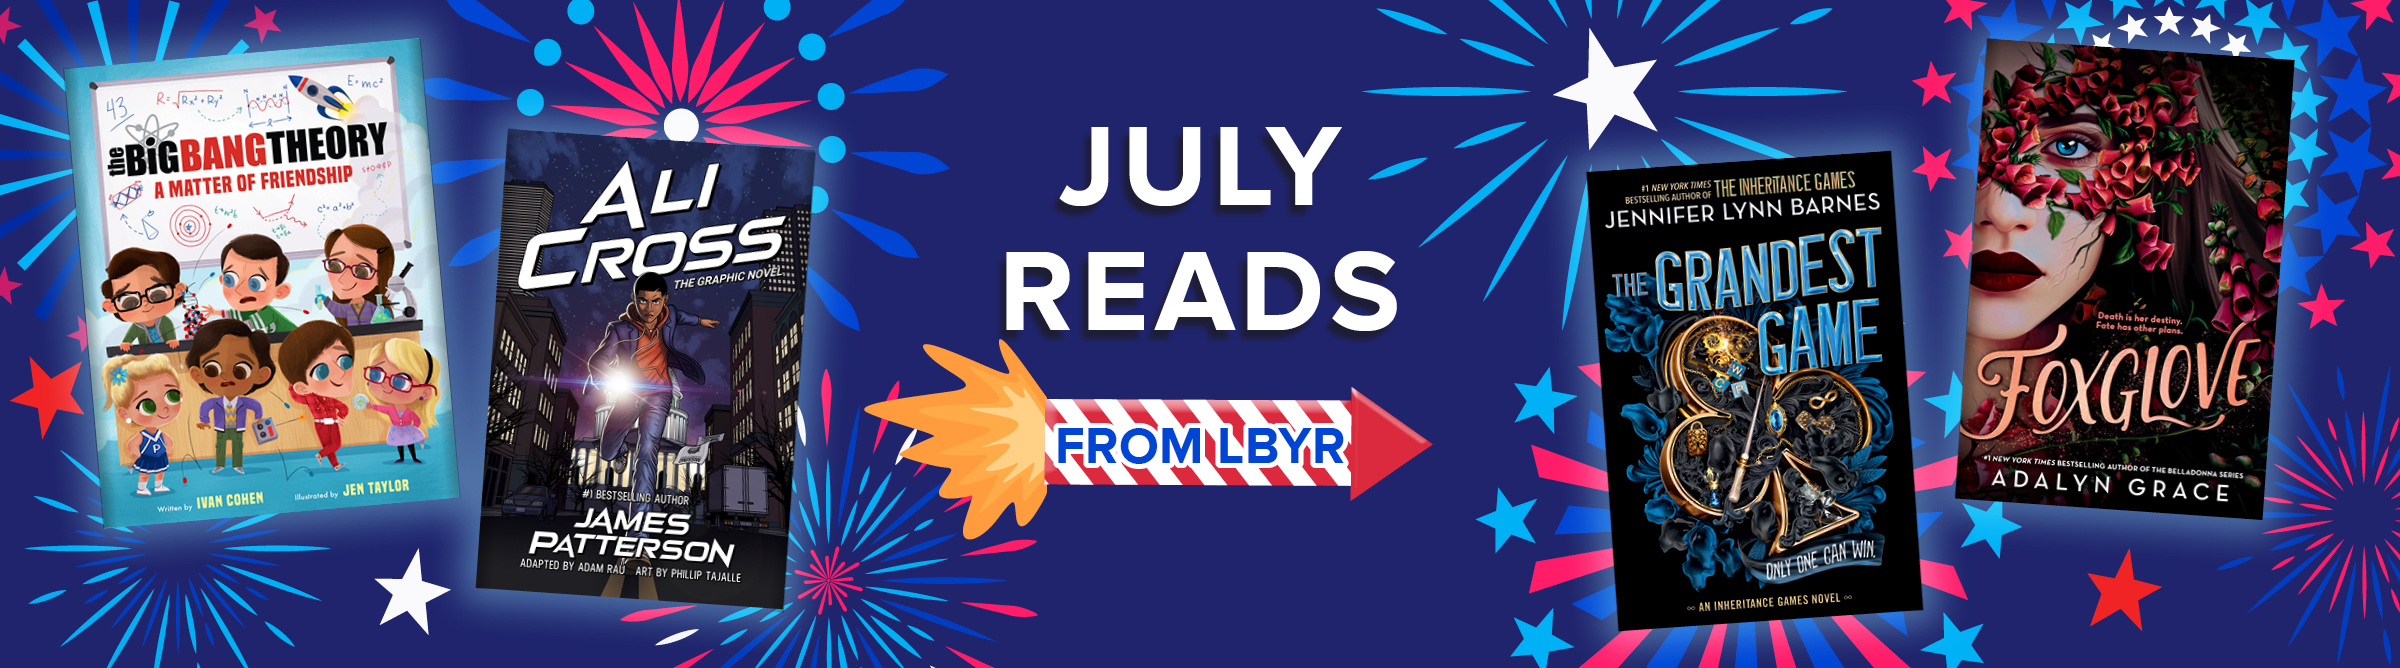 June reads from LBYR featuring THE BIG BANG THEORY: A MATTER OF FRIENDSHIP, ALI CROSS: THE GRAPHIC NOVEL, THE GRANDEST GAME, and FOXGLOVE